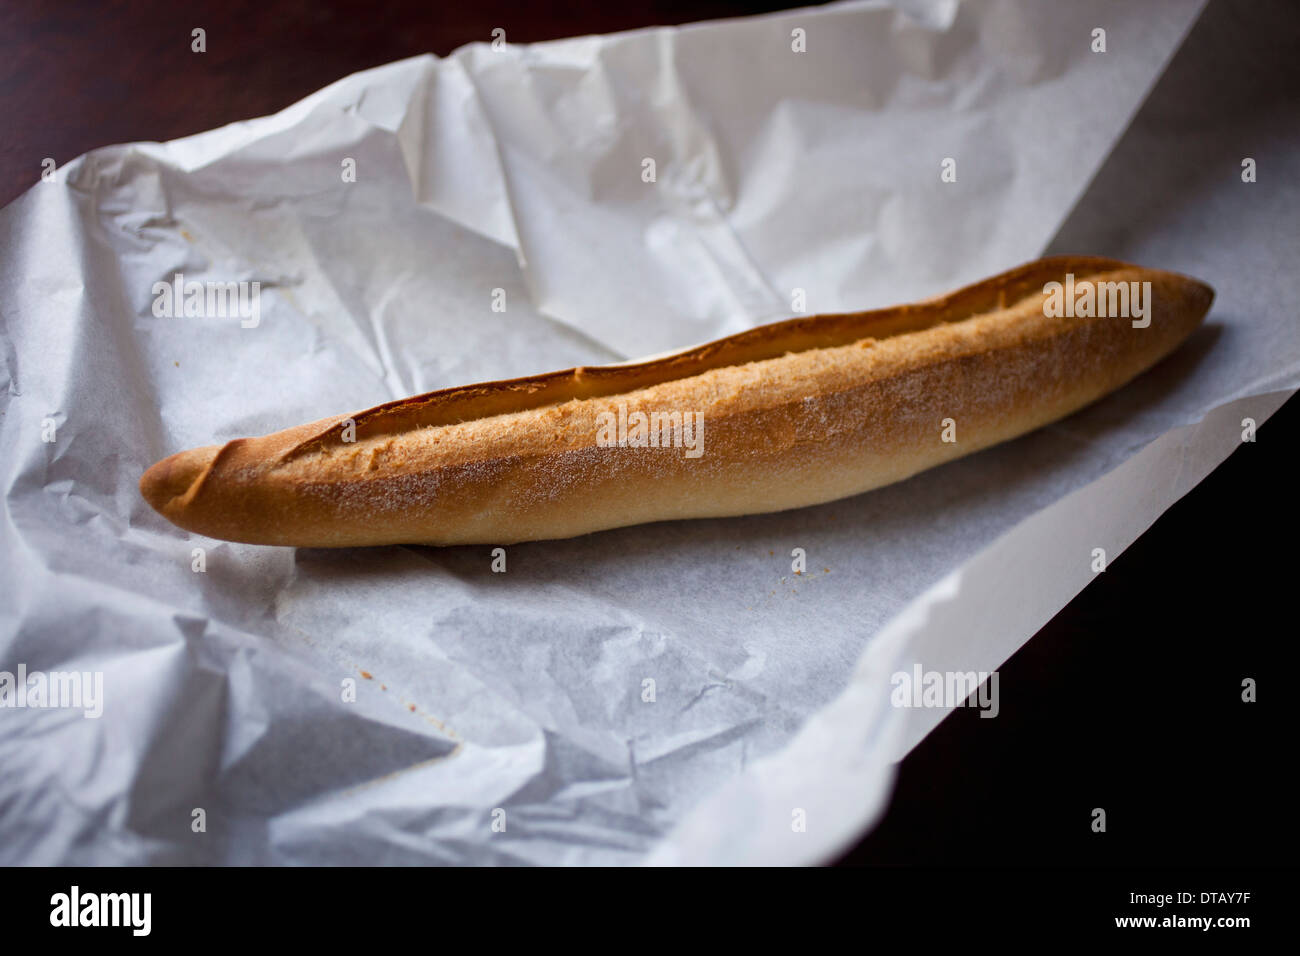 Baguette on paper, close-up Stock Photo